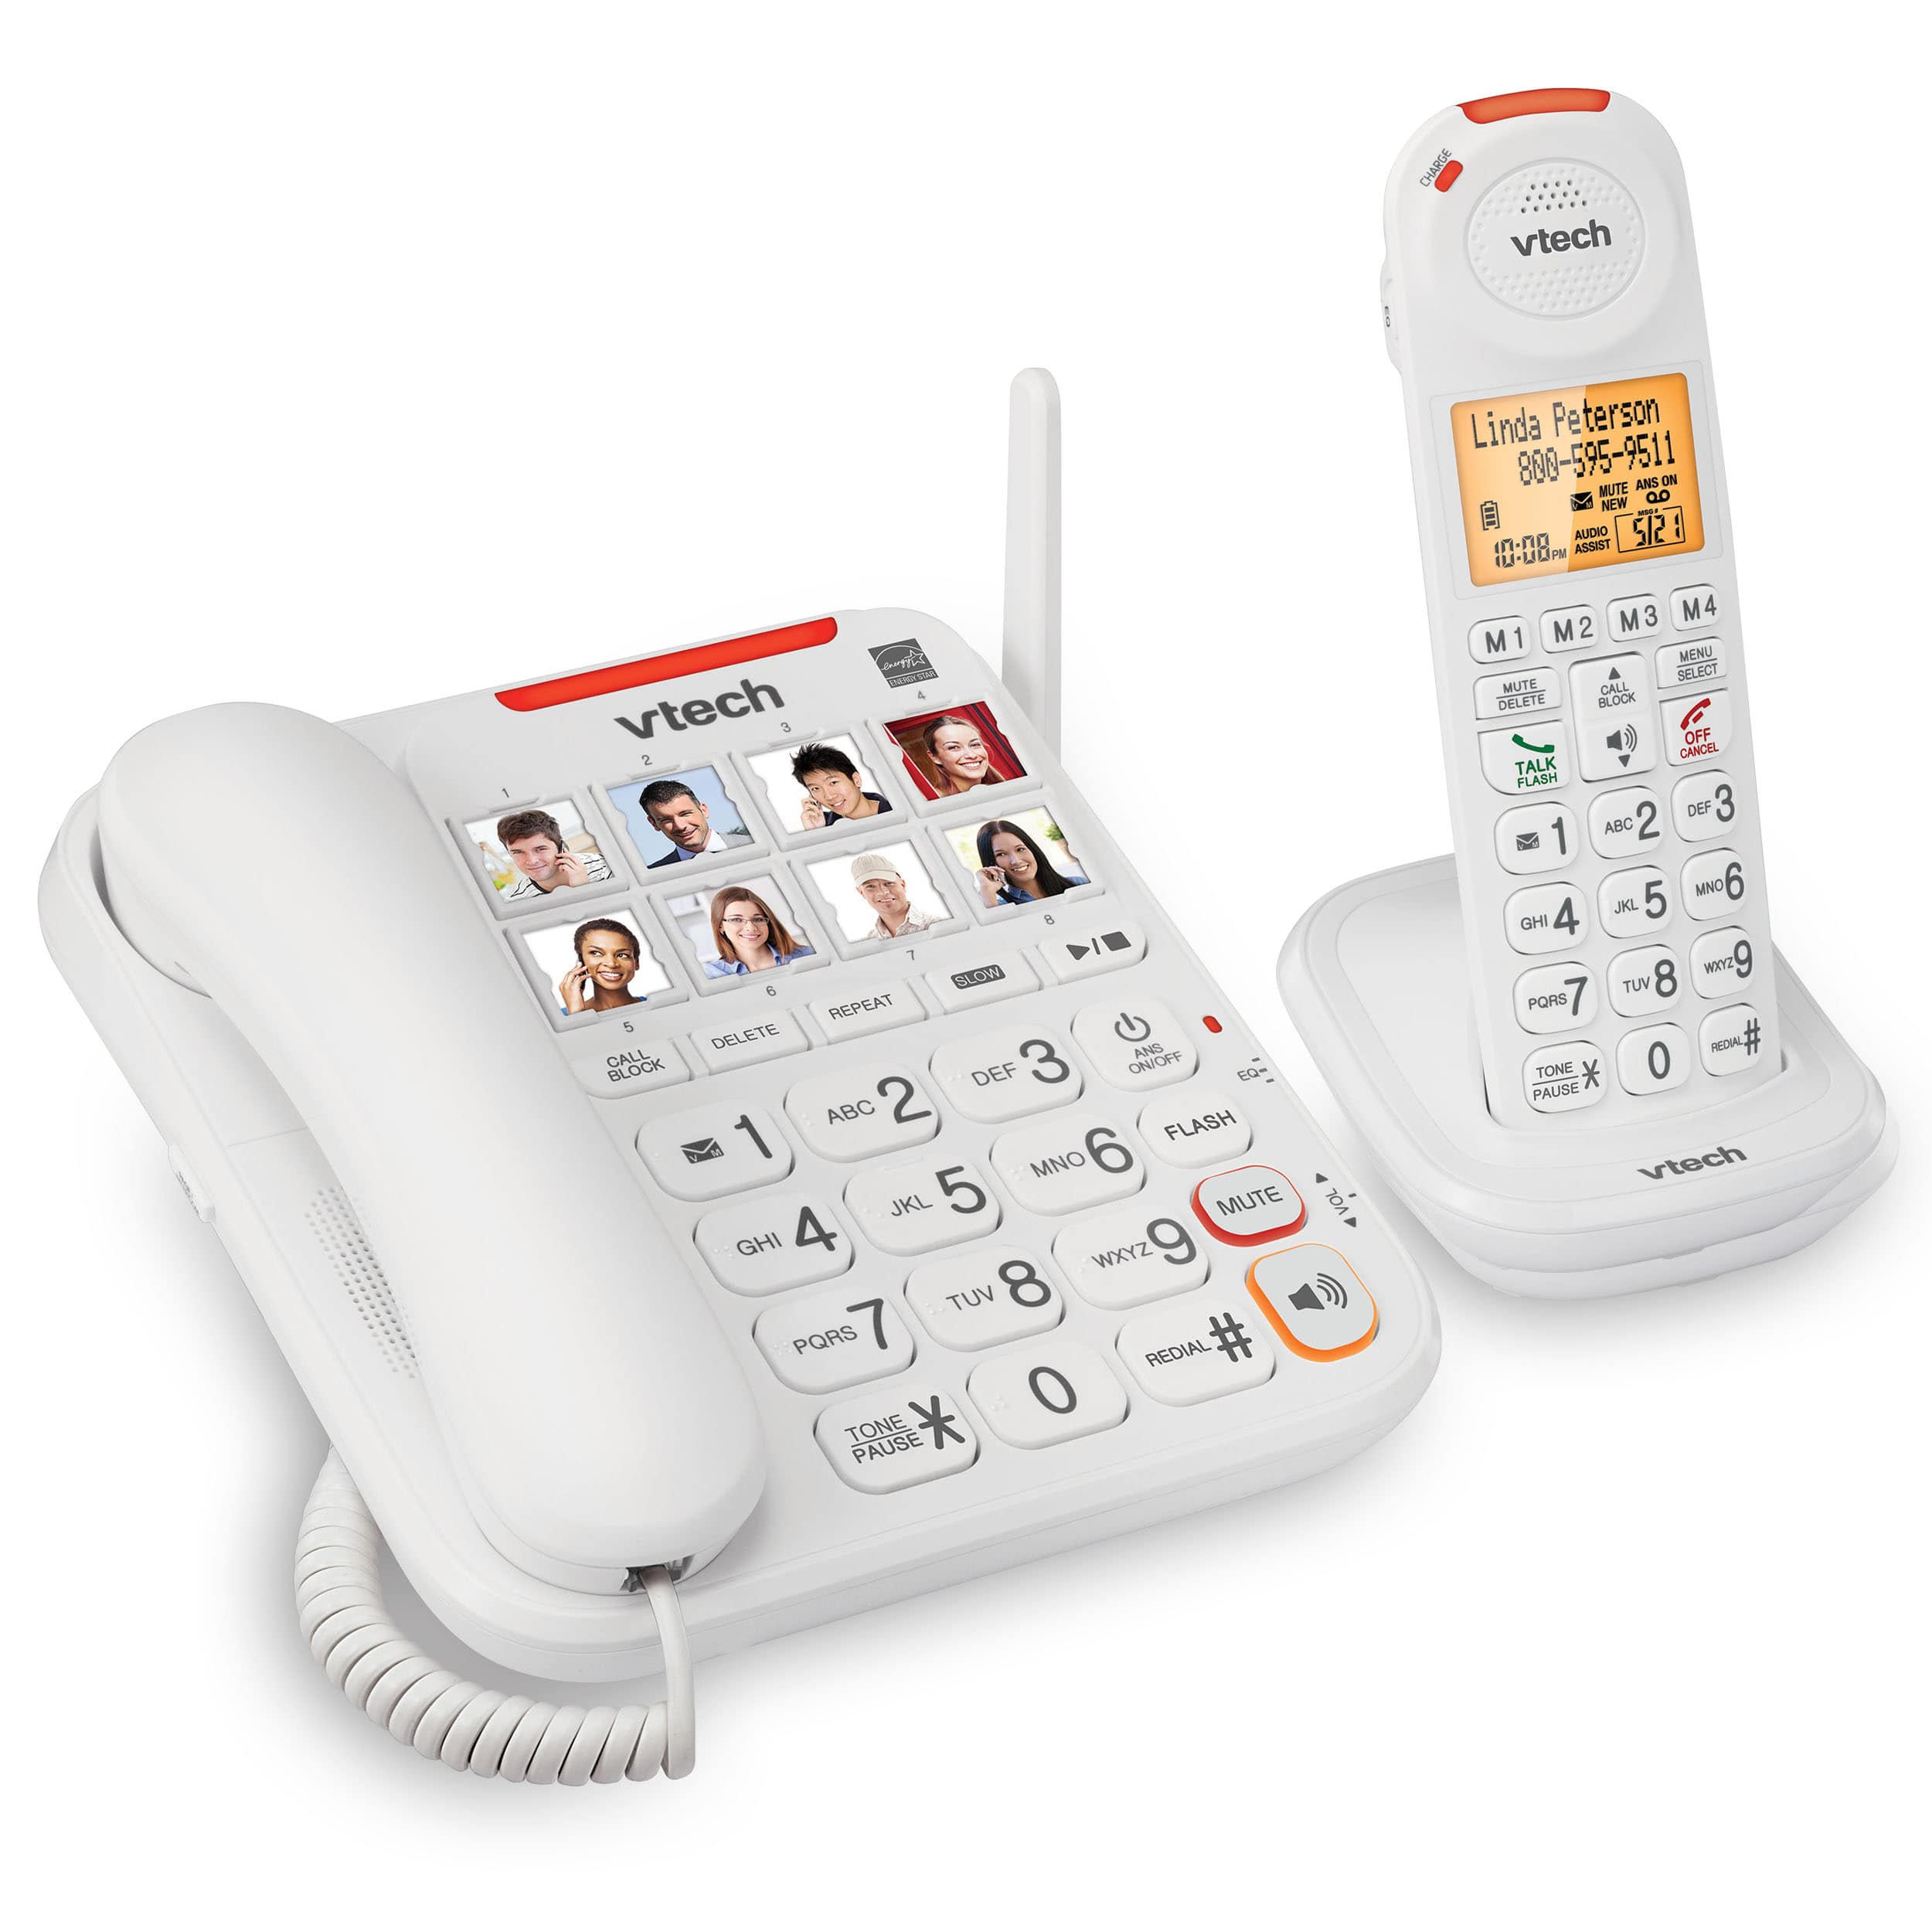 Vtech SN5147 Amplified Corded/Cordless Senior Phone System with 90dB Extra-Loud Visual Ringer Big Buttons & Large Display 